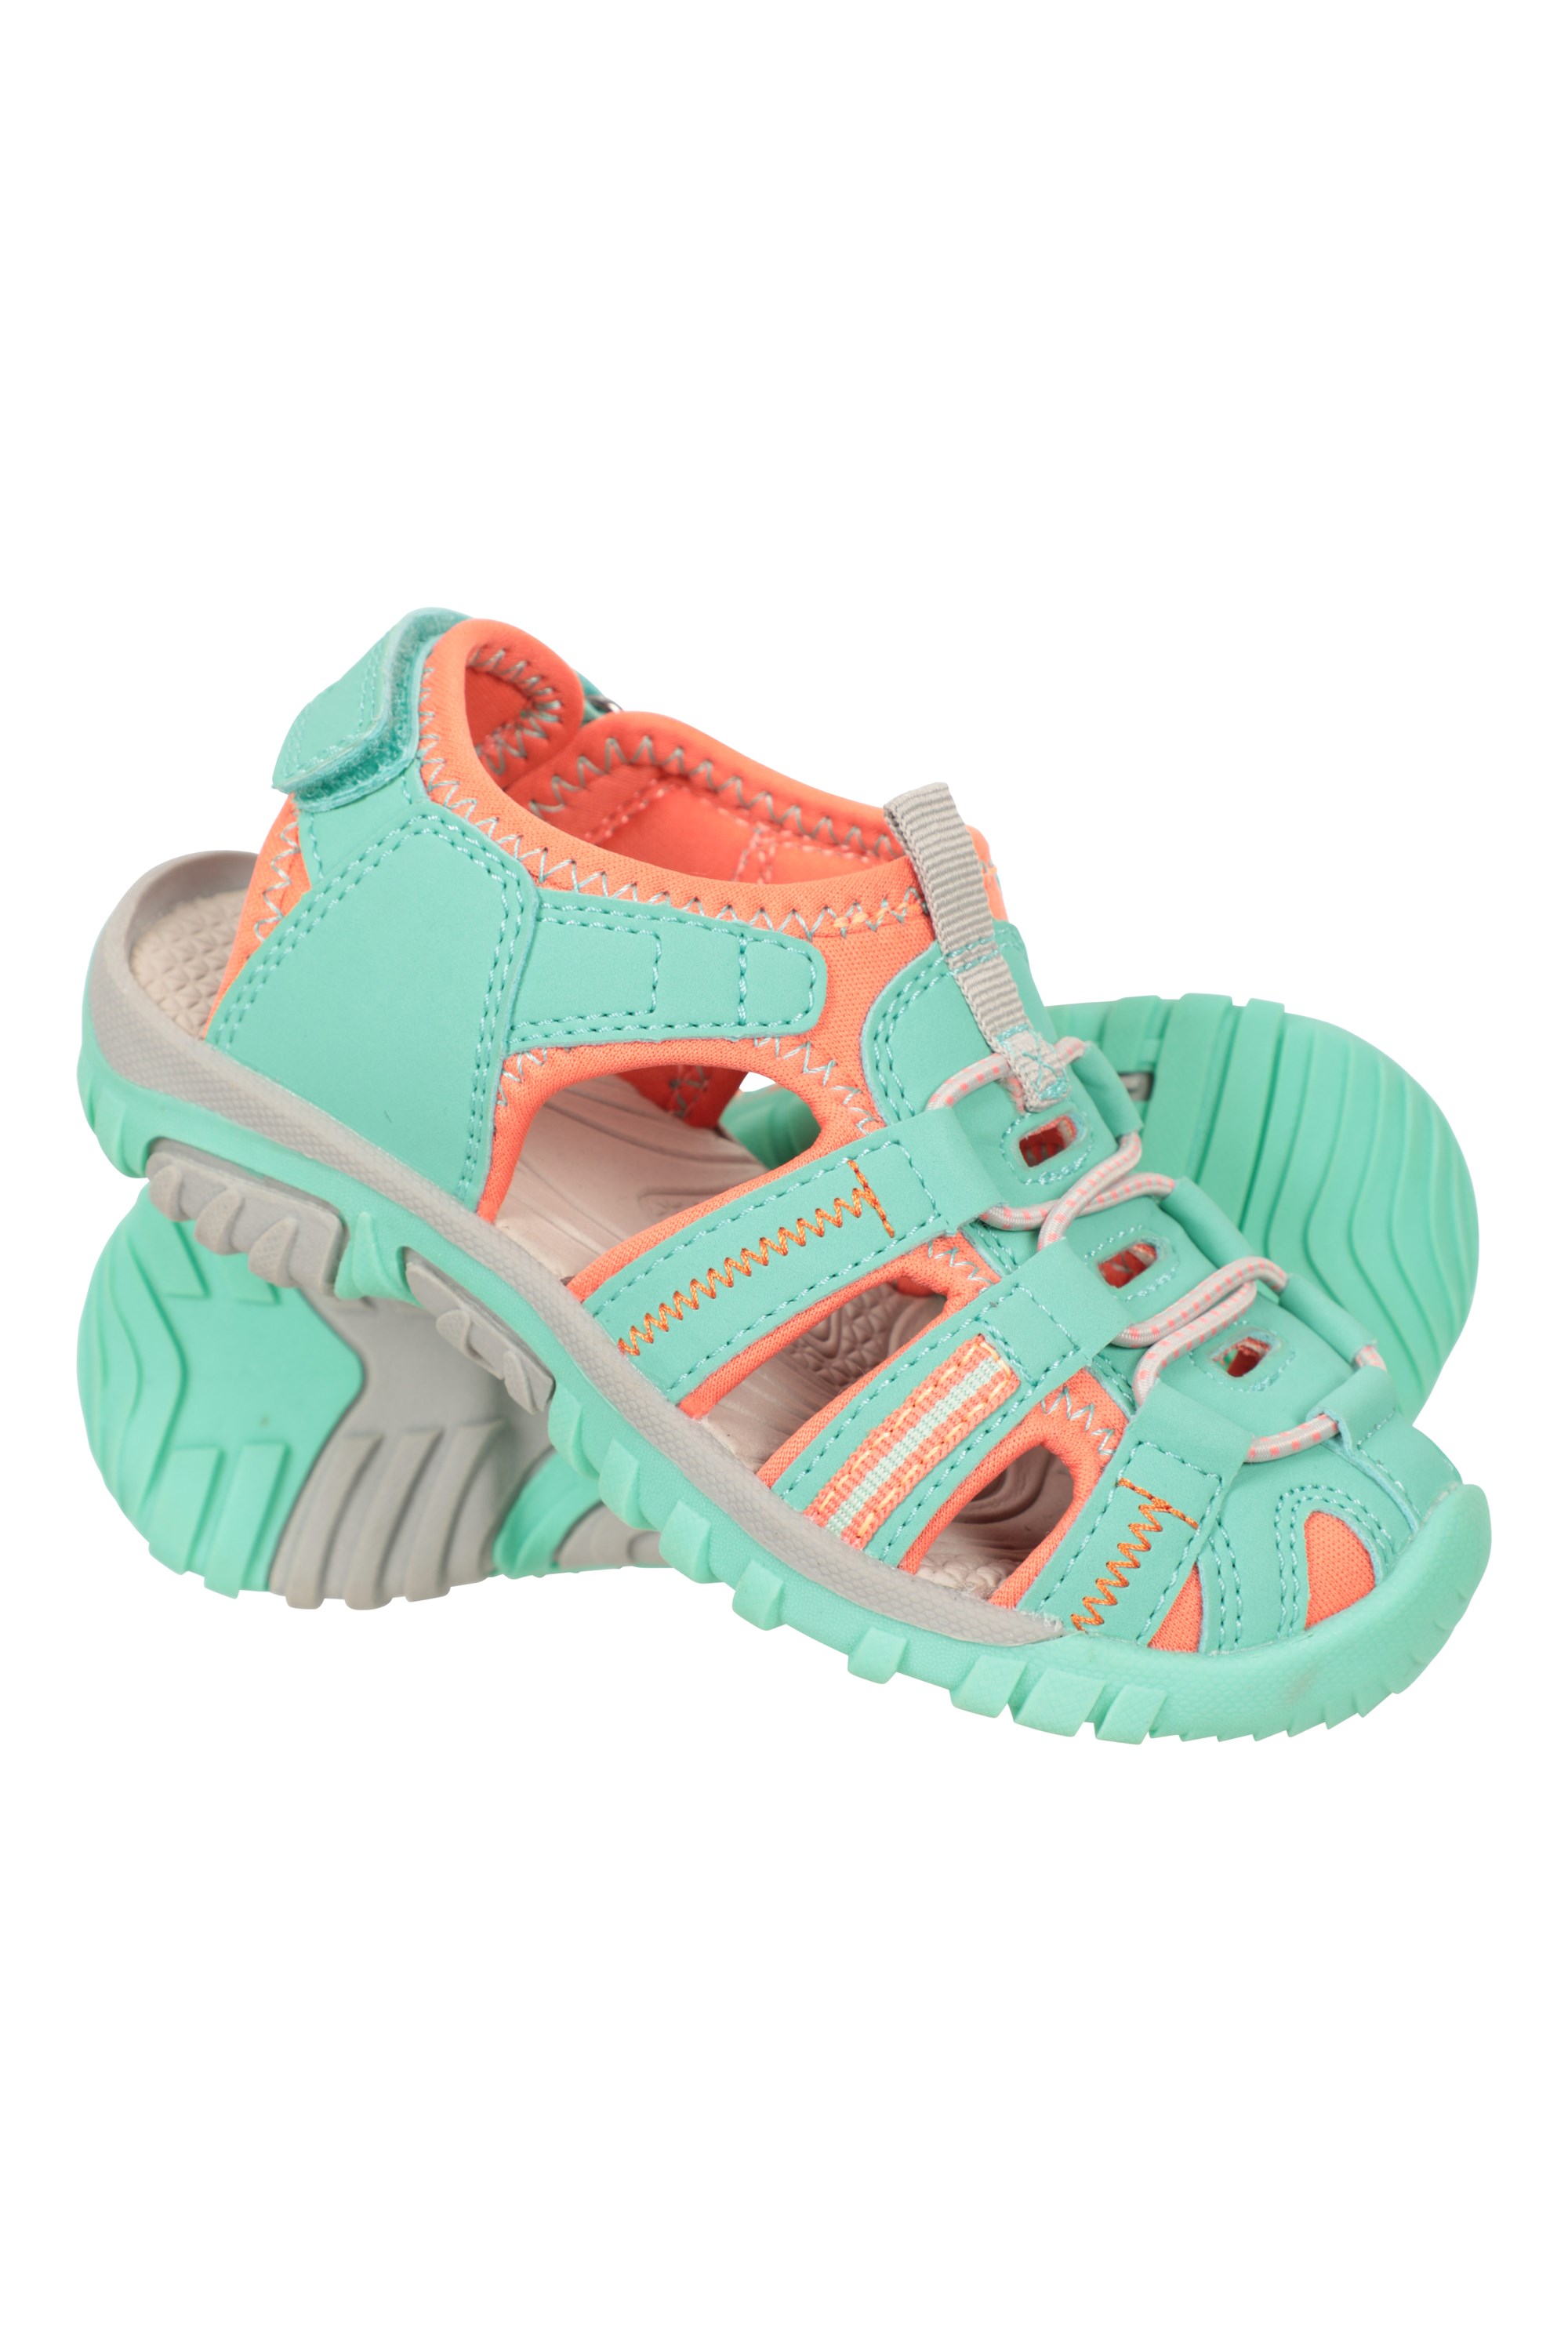 Bay Junior Mountain Warehouse Shandals - Turquoise